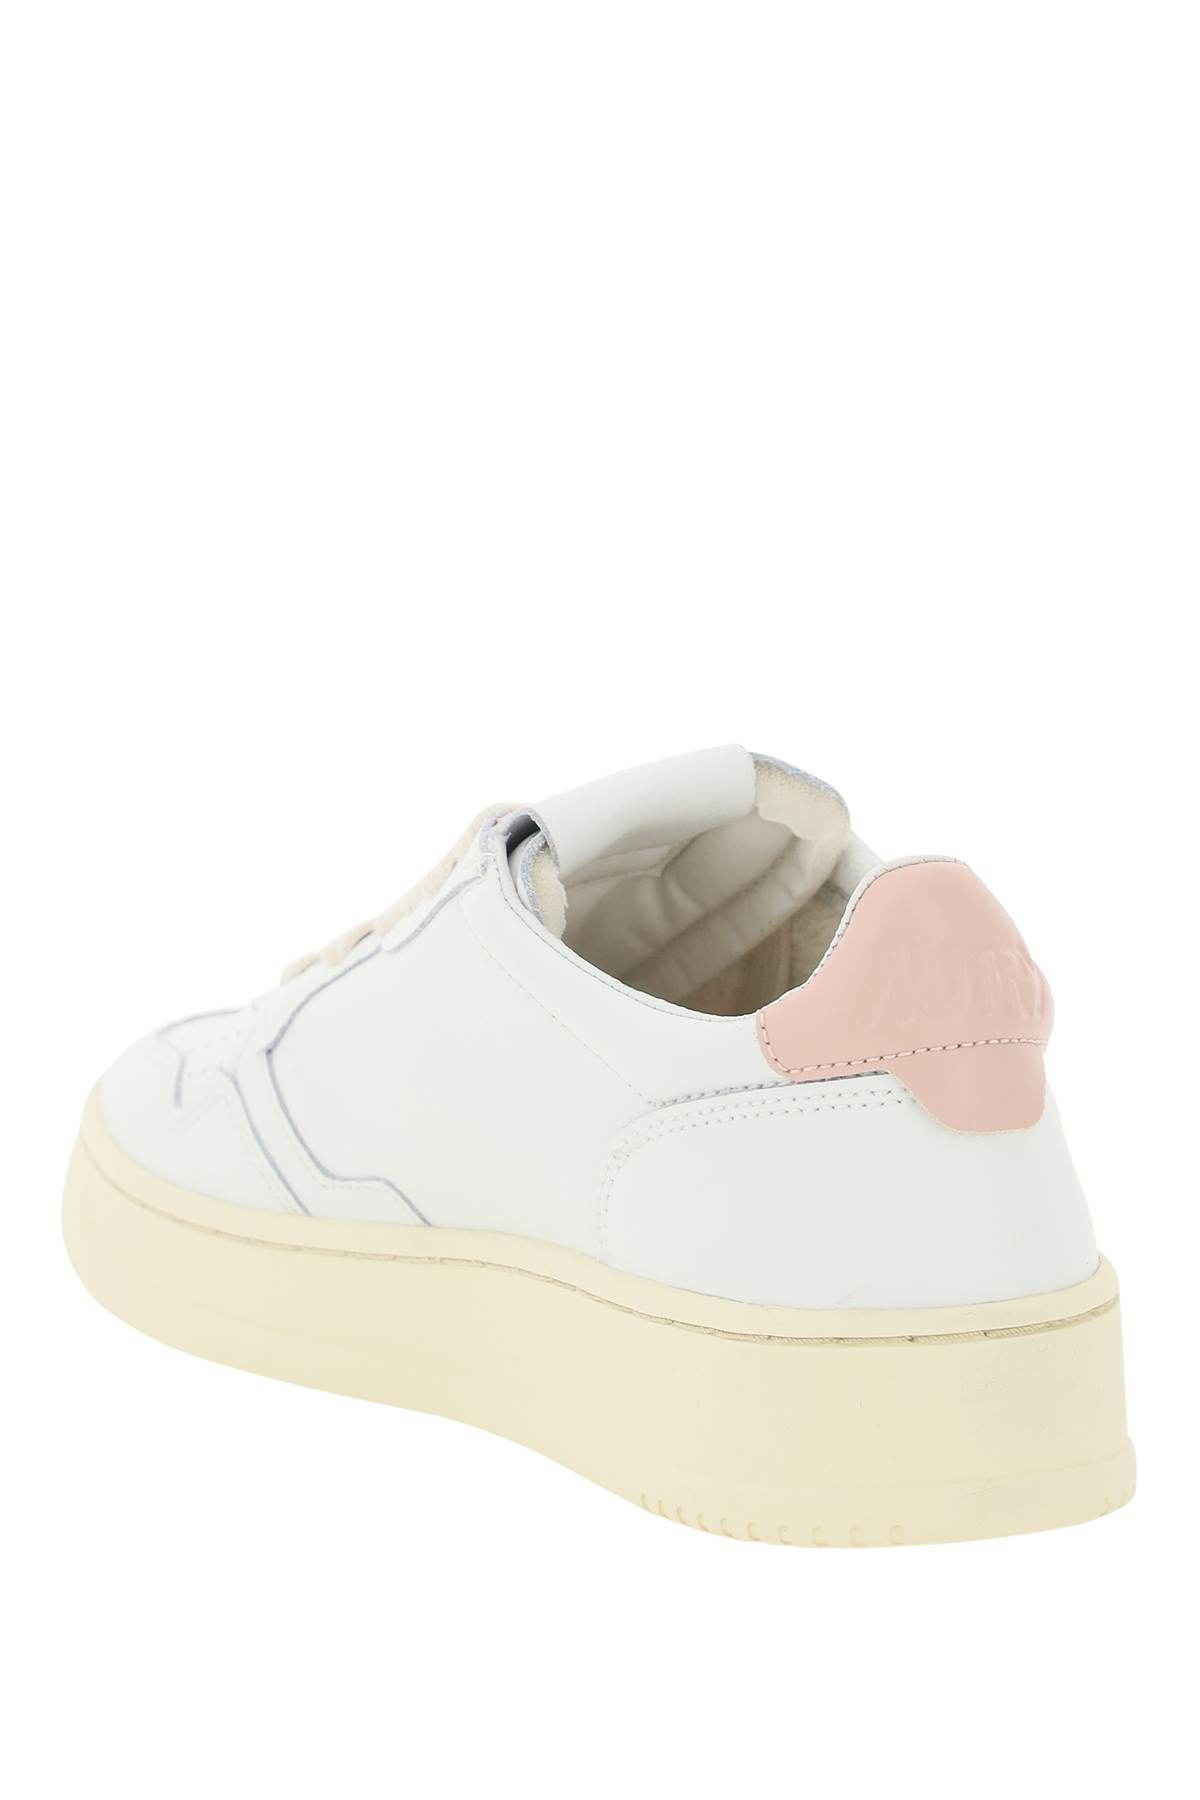 Shop Autry Leather Medalist Low Sneakers In White Pink (white)